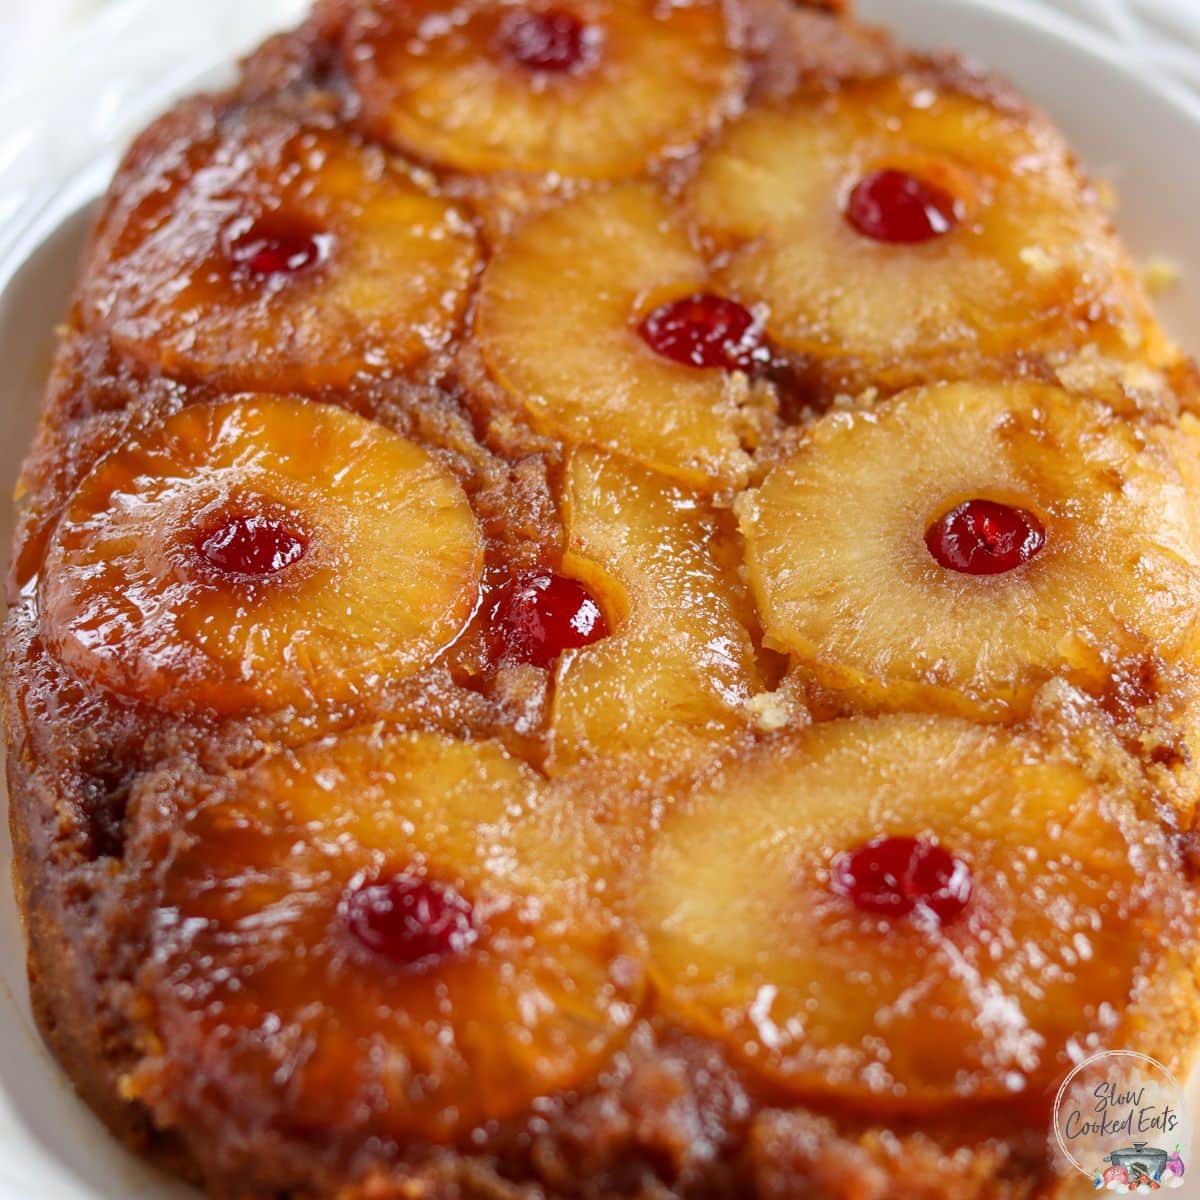 Pineapple upside down cake with slices of pineapple with maraschino cherries and a brown sugar butter glaze.